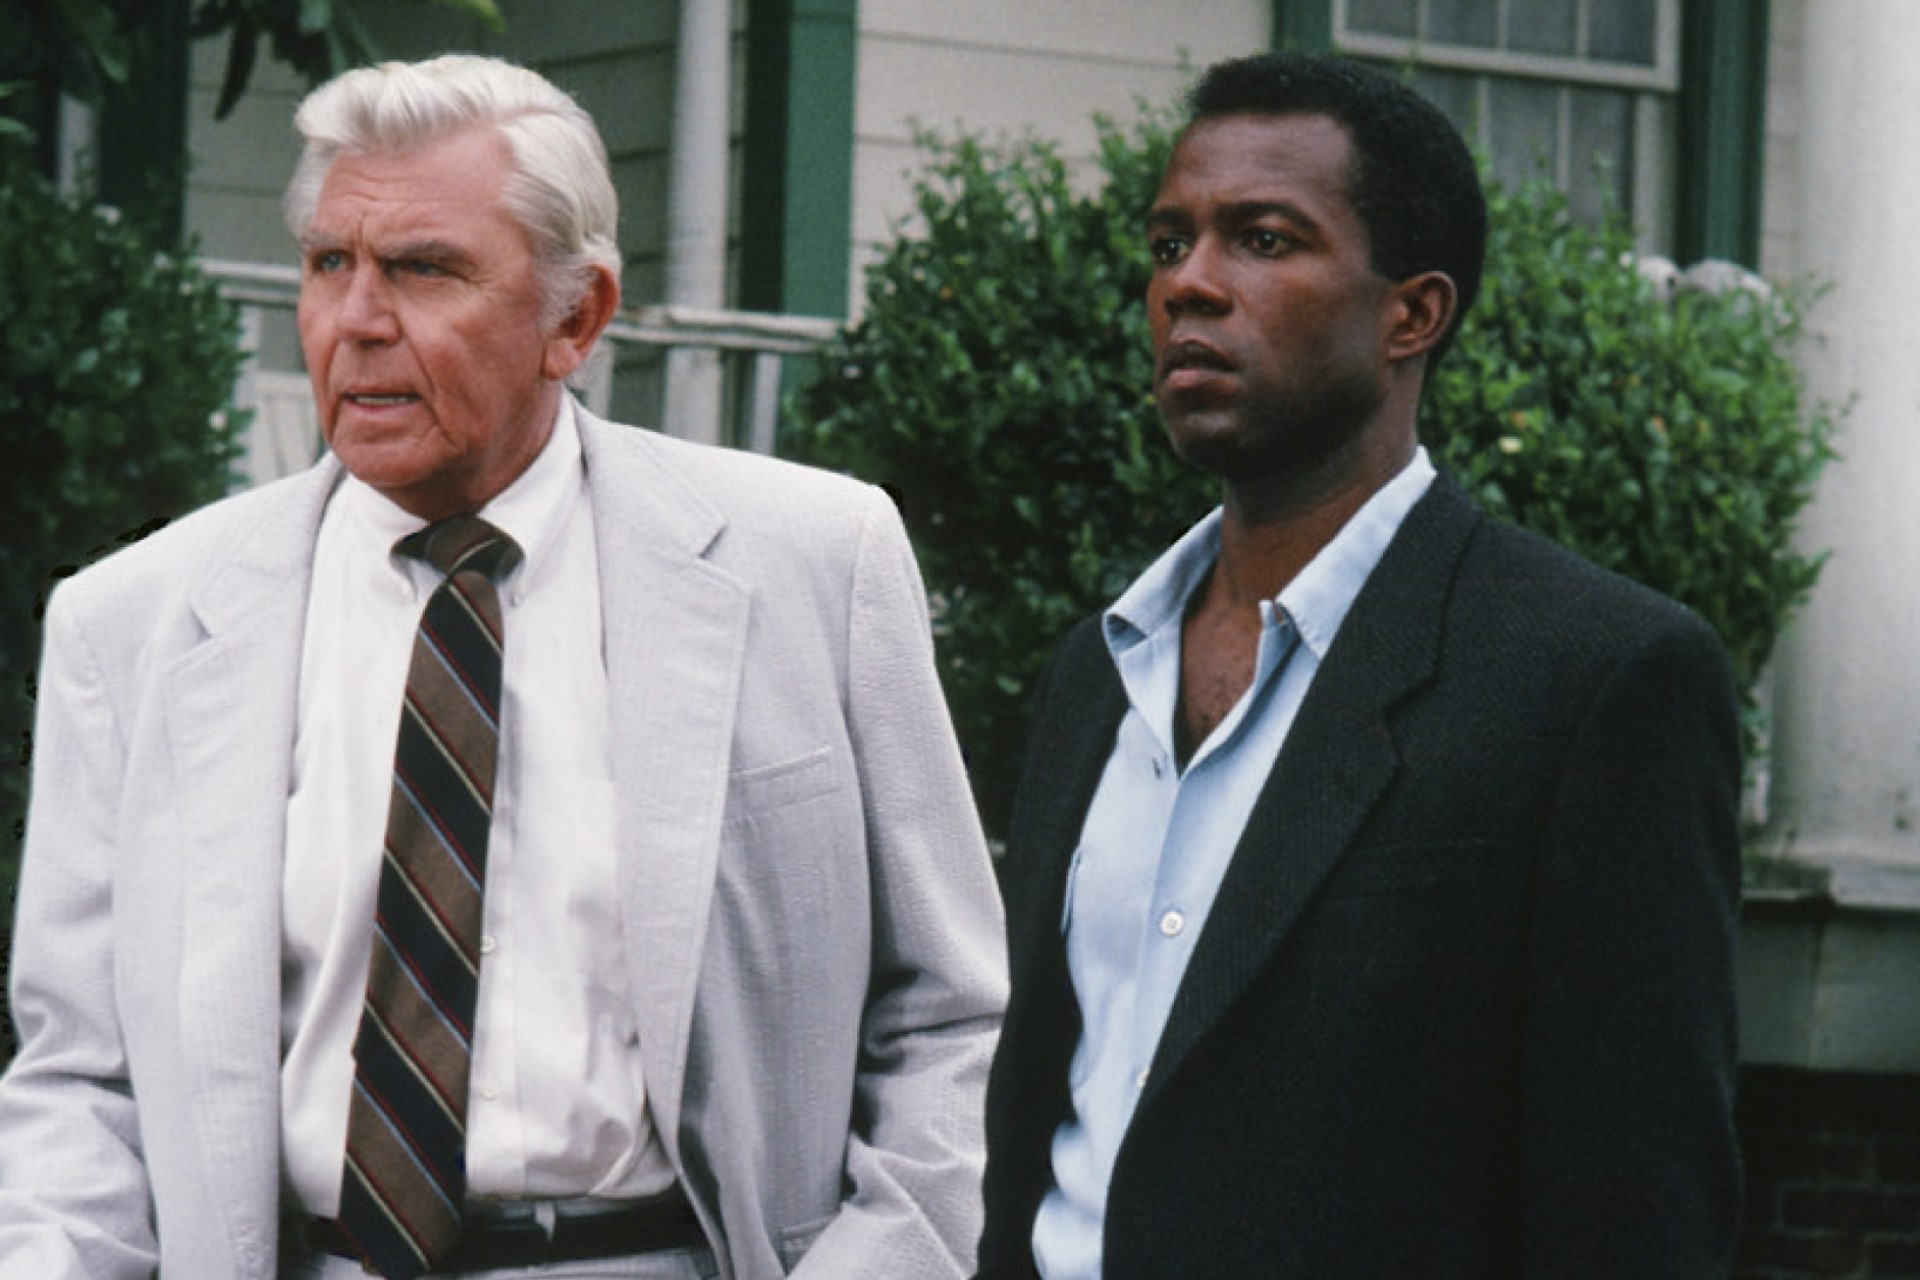 <p>Gilyard never really sat still. A year after 'Die Hard,' he started his regular appearance in the detective series 'Matlock' as private detective Conrad McMasters. The actor lent a helping hand to defense attorney Ben Matlock for 85 episodes.</p> <p>Image: NBC</p>